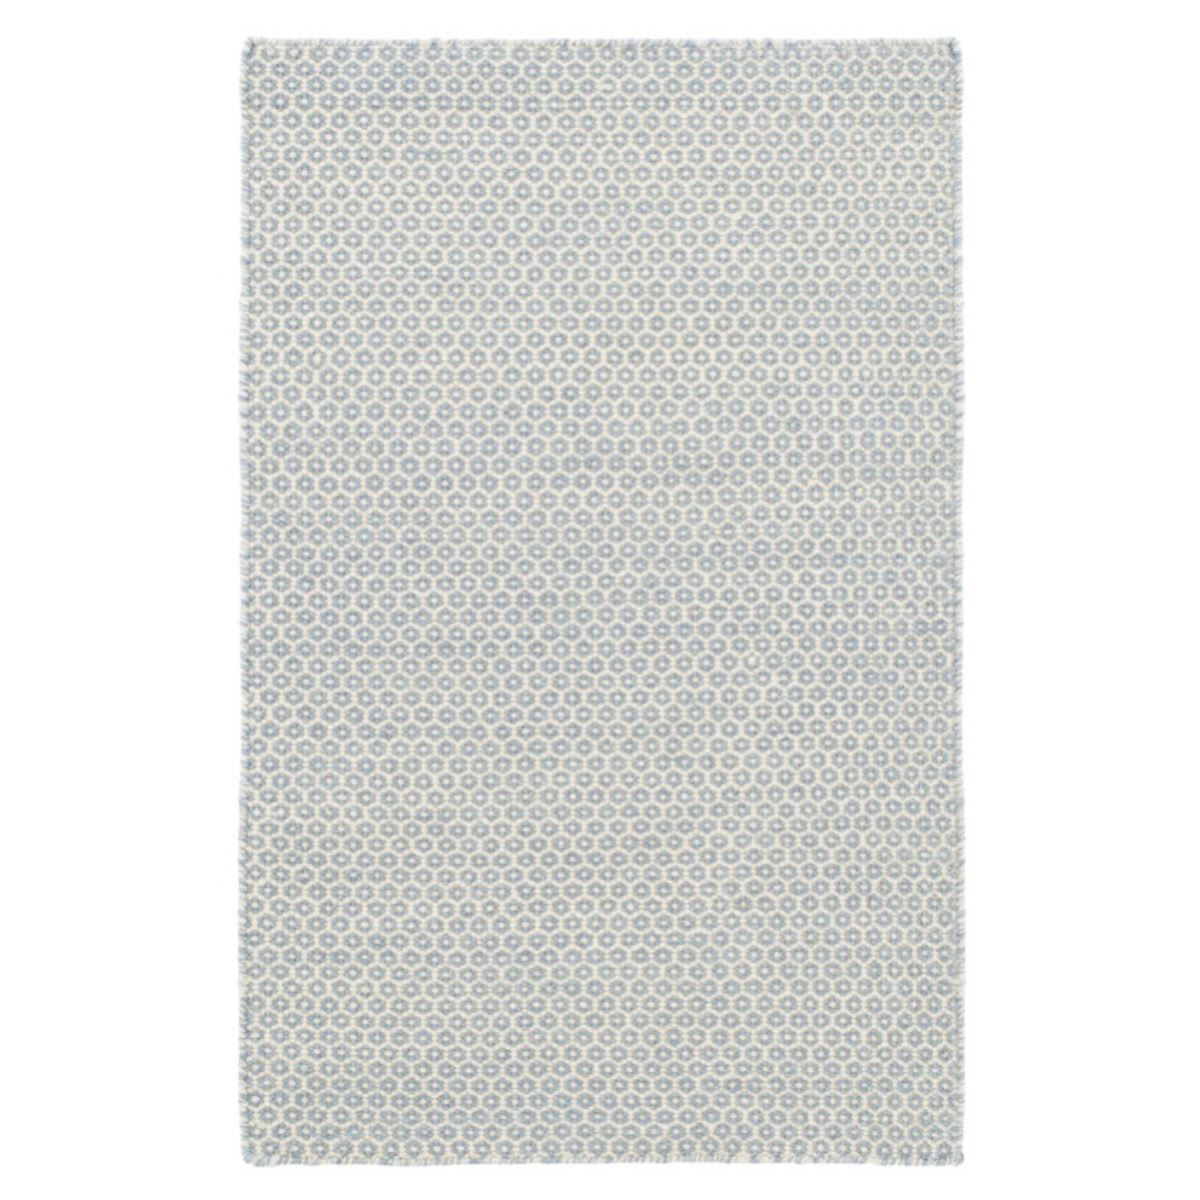 Honeycomb French Blue/Ivory Woven Wool Rug. Top view. 